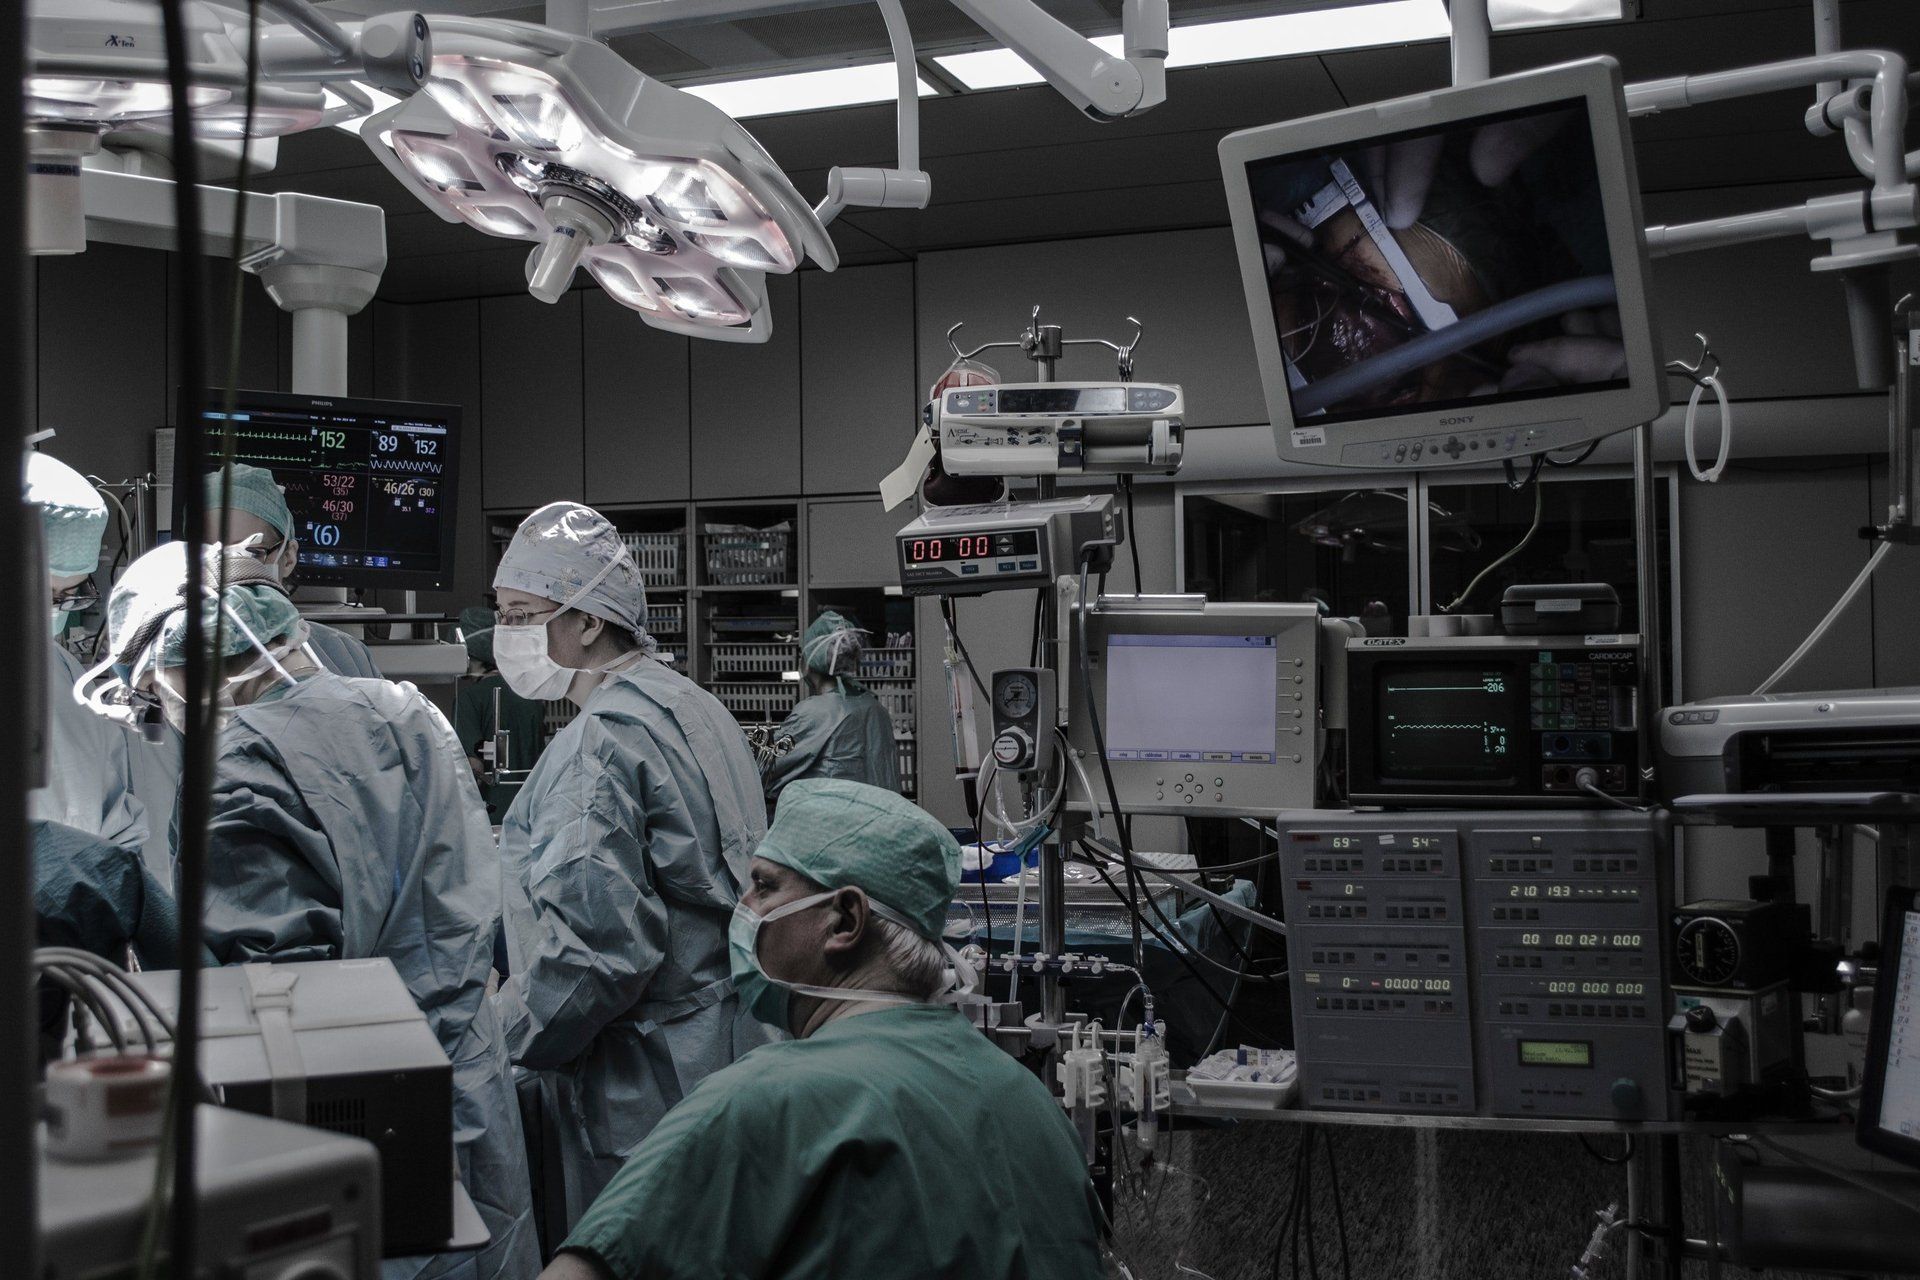 A group of surgeons are operating on a patient in an operating room.